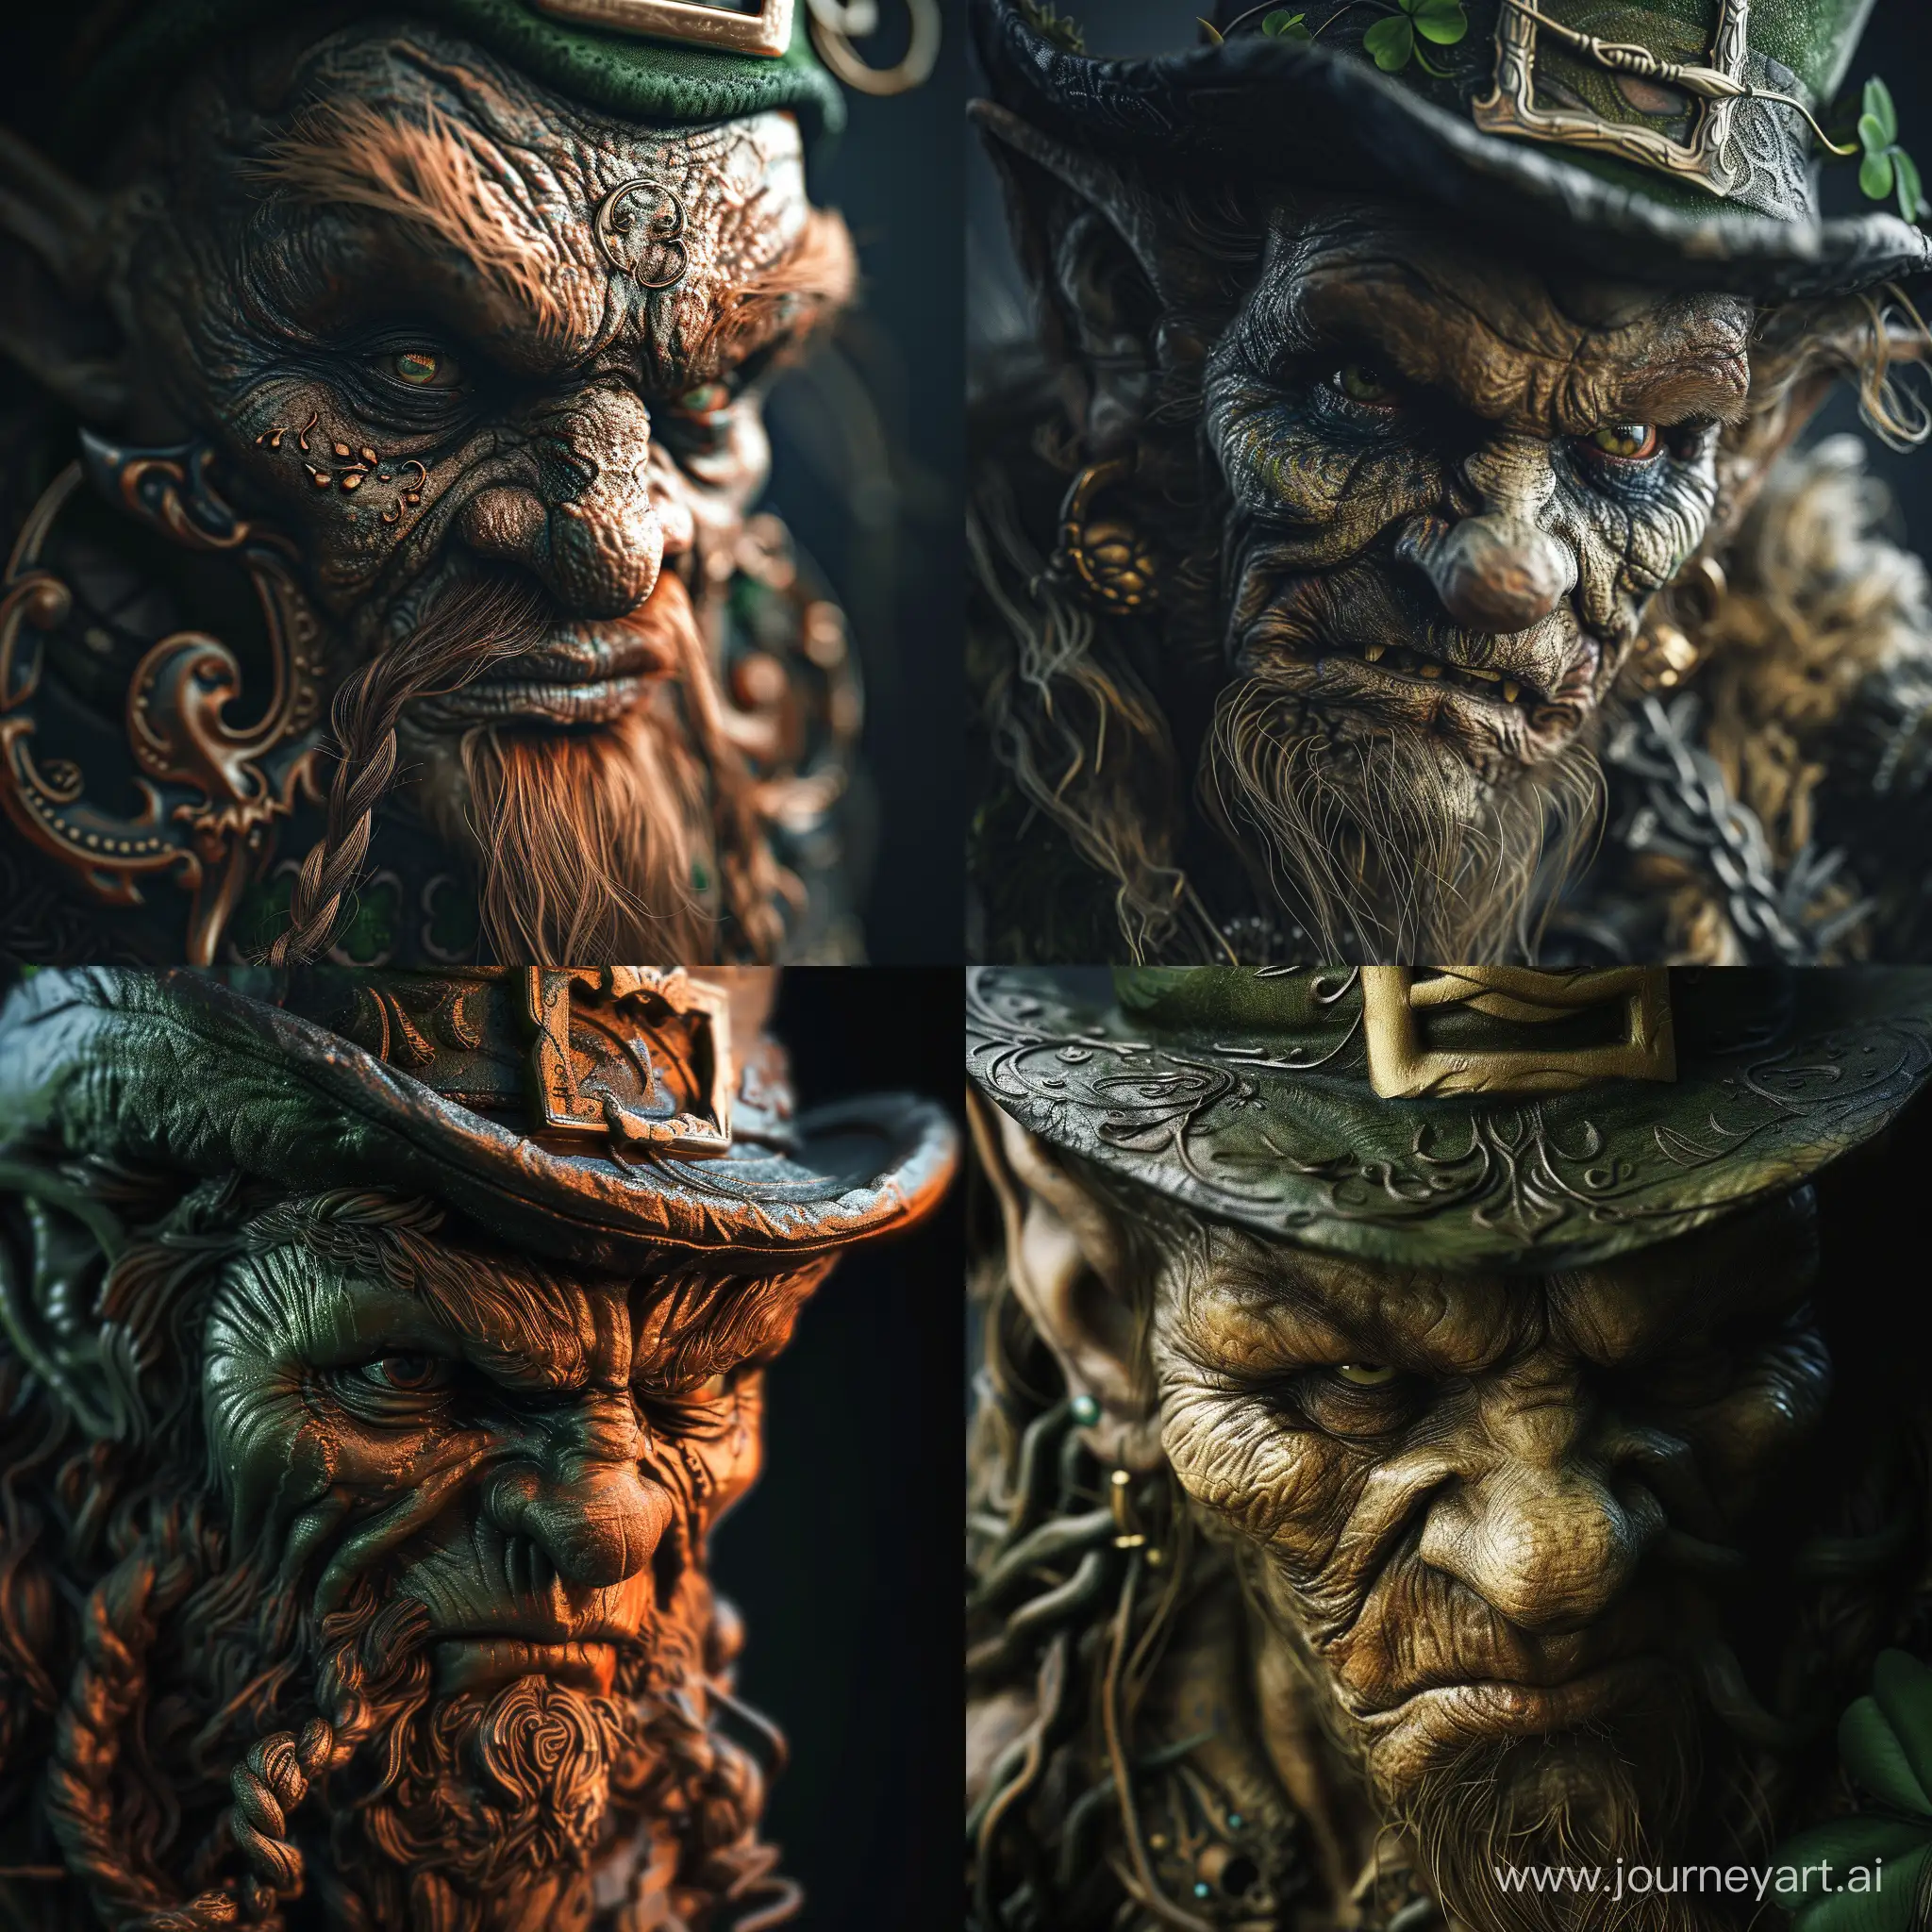 Close up Creepy leprechaun. Ornate details. Dark contrasting colors. Grotesque style image. Incredibly detailed.